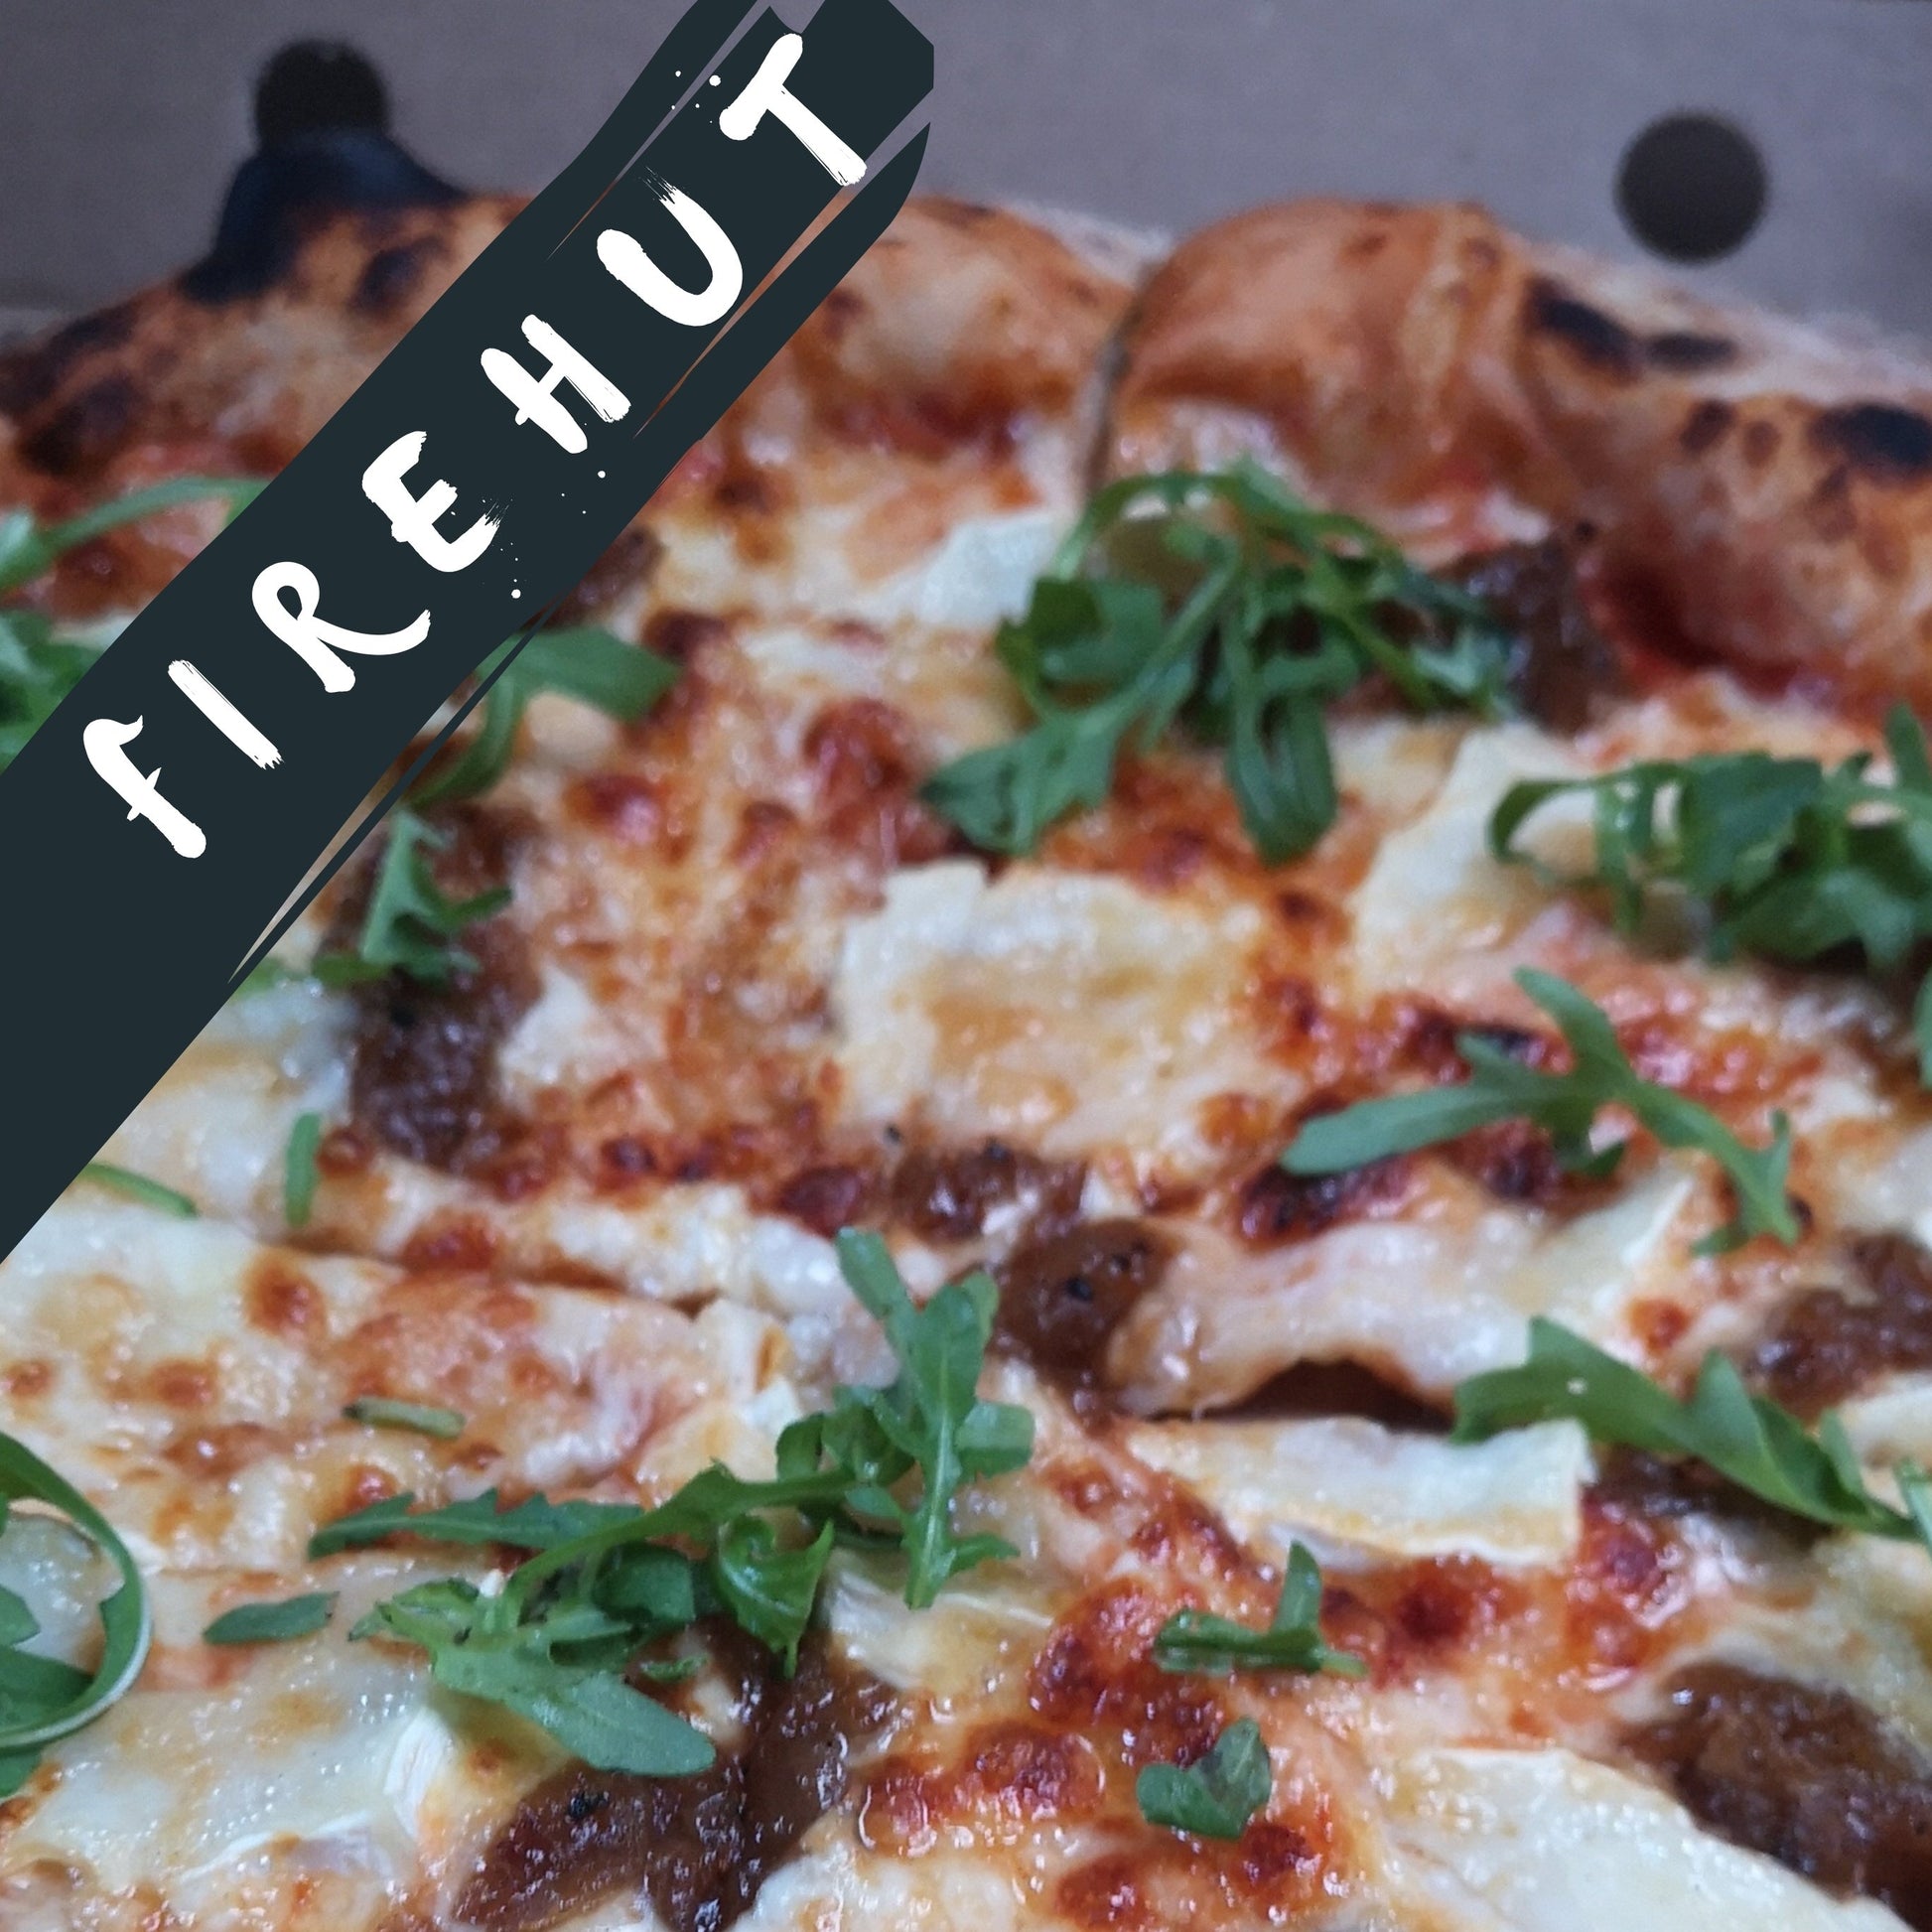 Firehut wood fired pizza, Goat's cheese and Caramelised Onion special pizza.